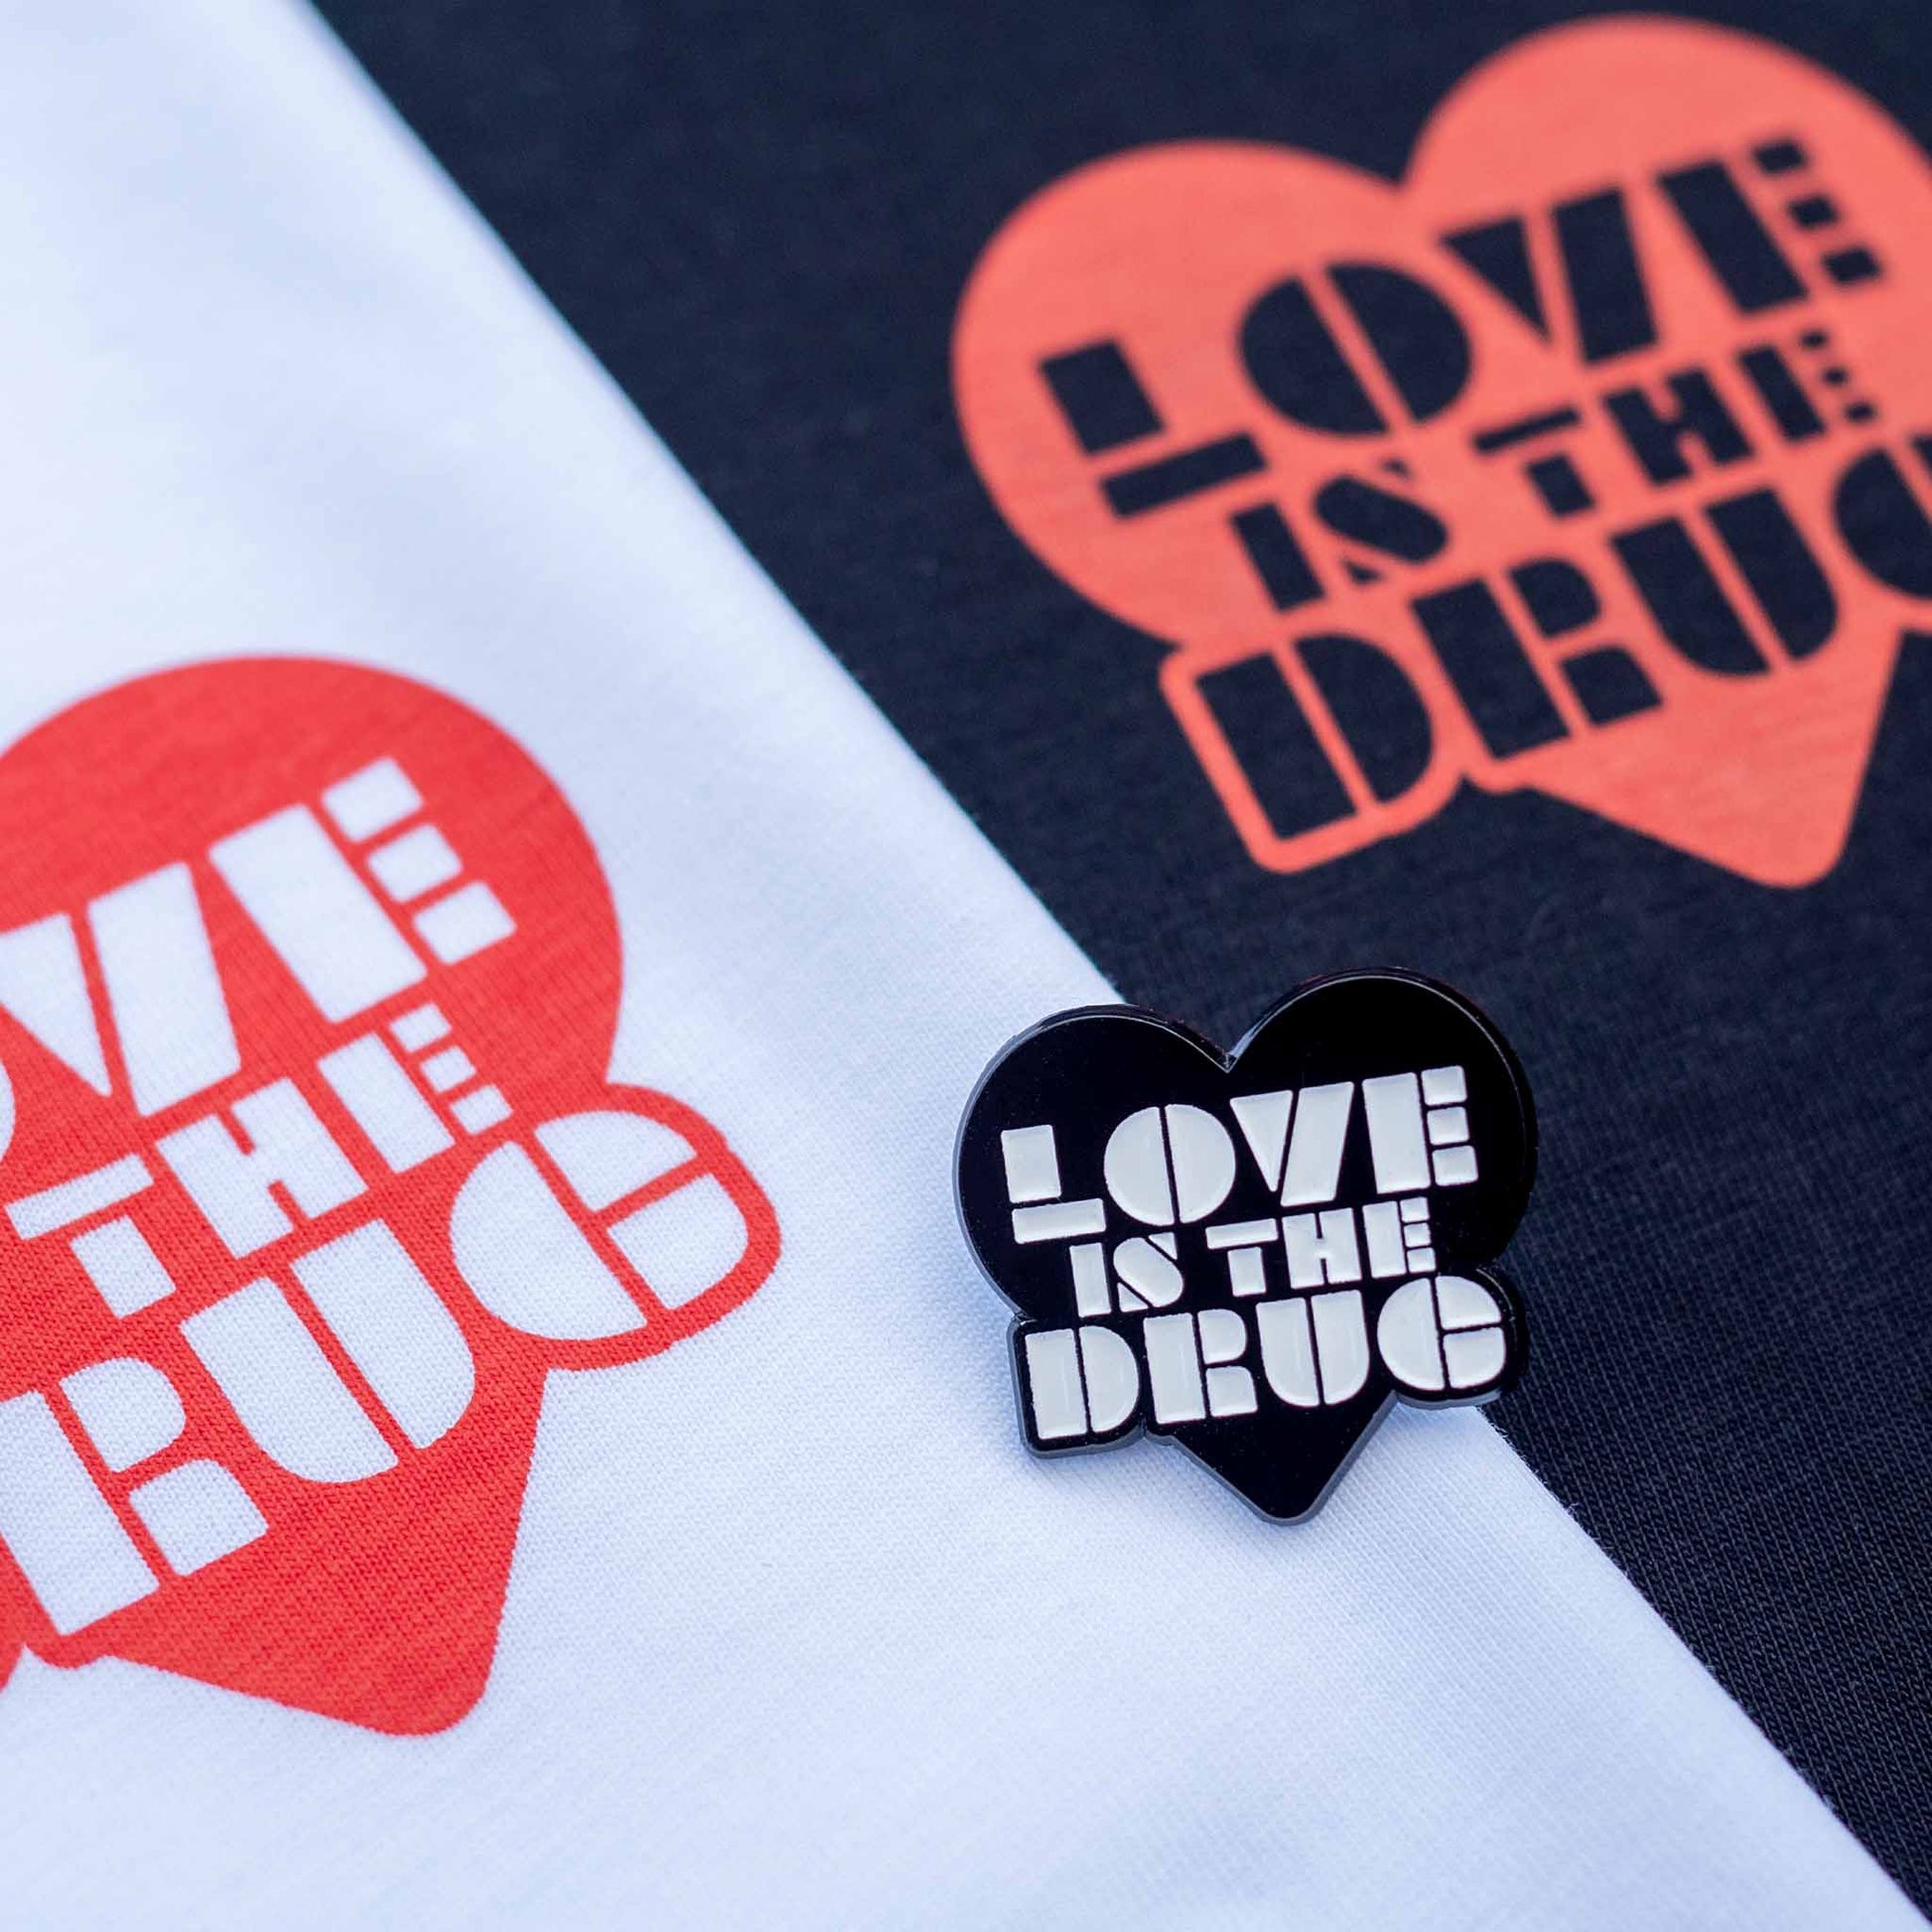 Love is the drug black and white graphic tee and pin badge design